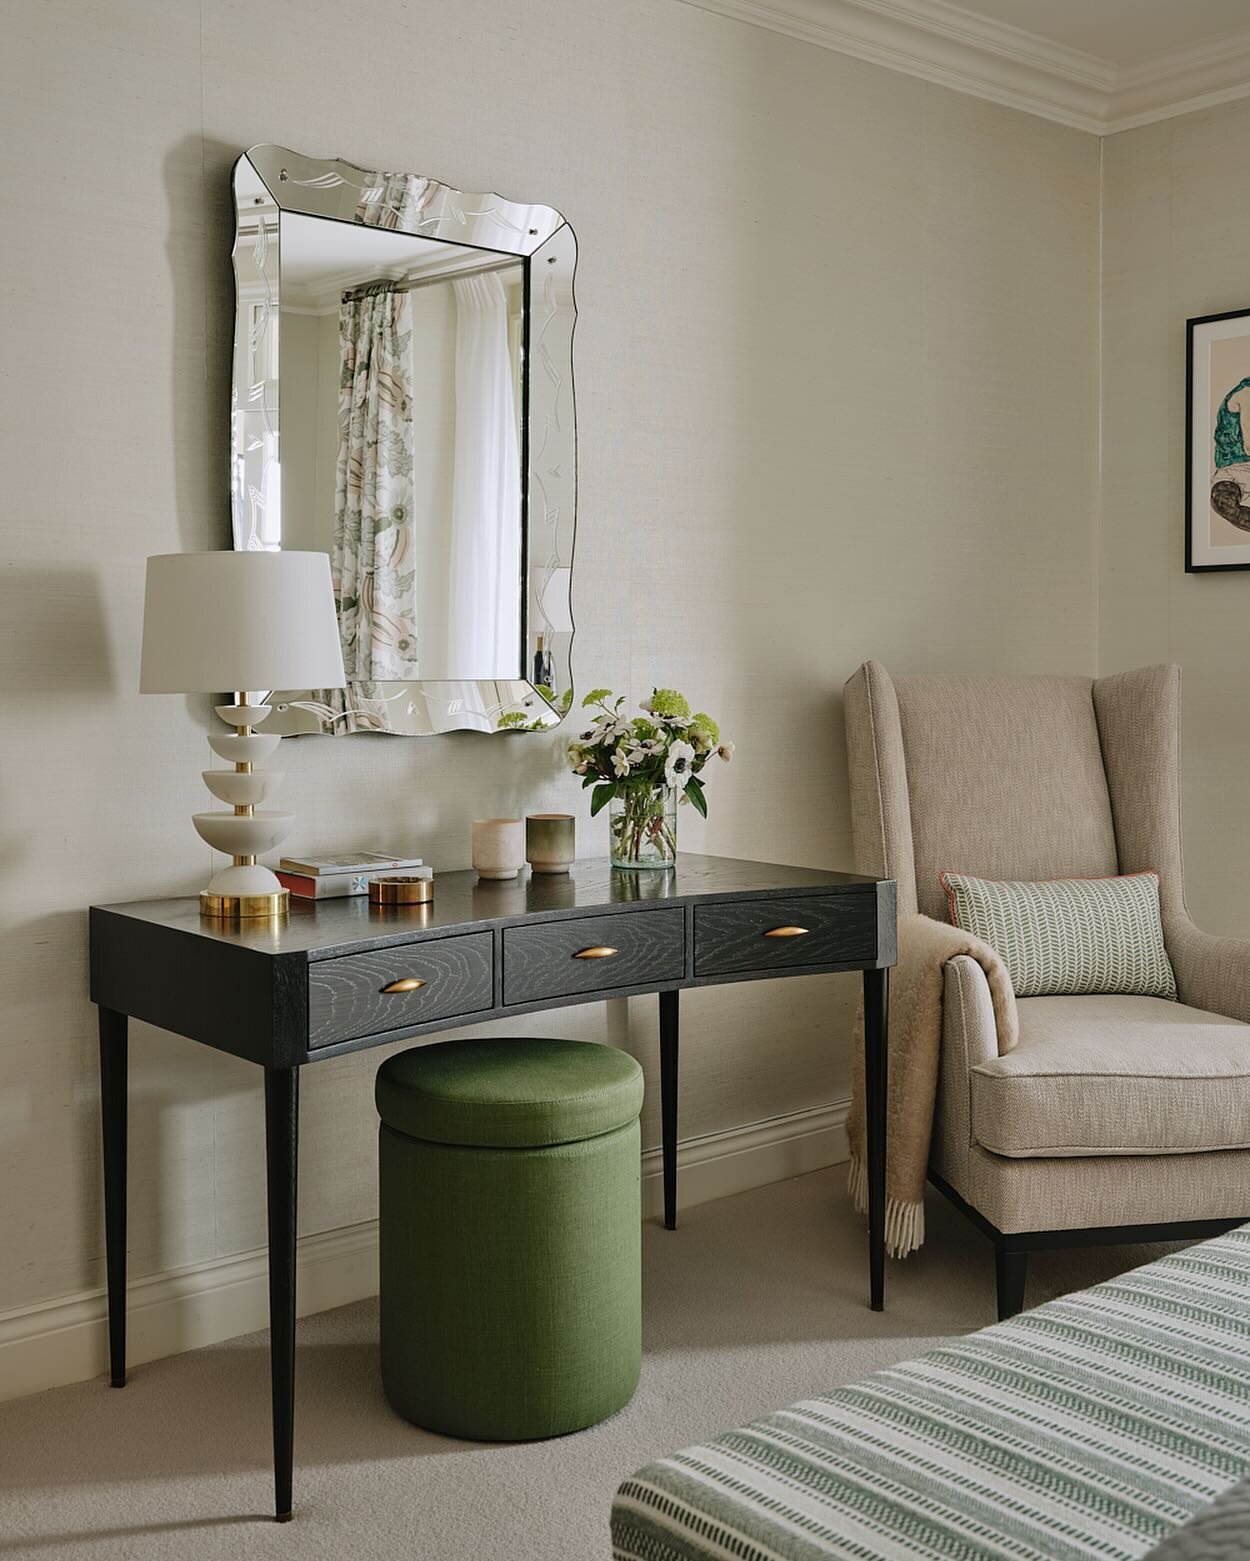 Mirror mirror on the wall. Pearlescent grasscloth on the walls and a 1940s Venetian style mirror helped prevent this lower ground level bedroom from feeling too gloomy. 📸 @horwoodphoto #interiordesign #recentproject #bedroomdecor #howwedwell #london